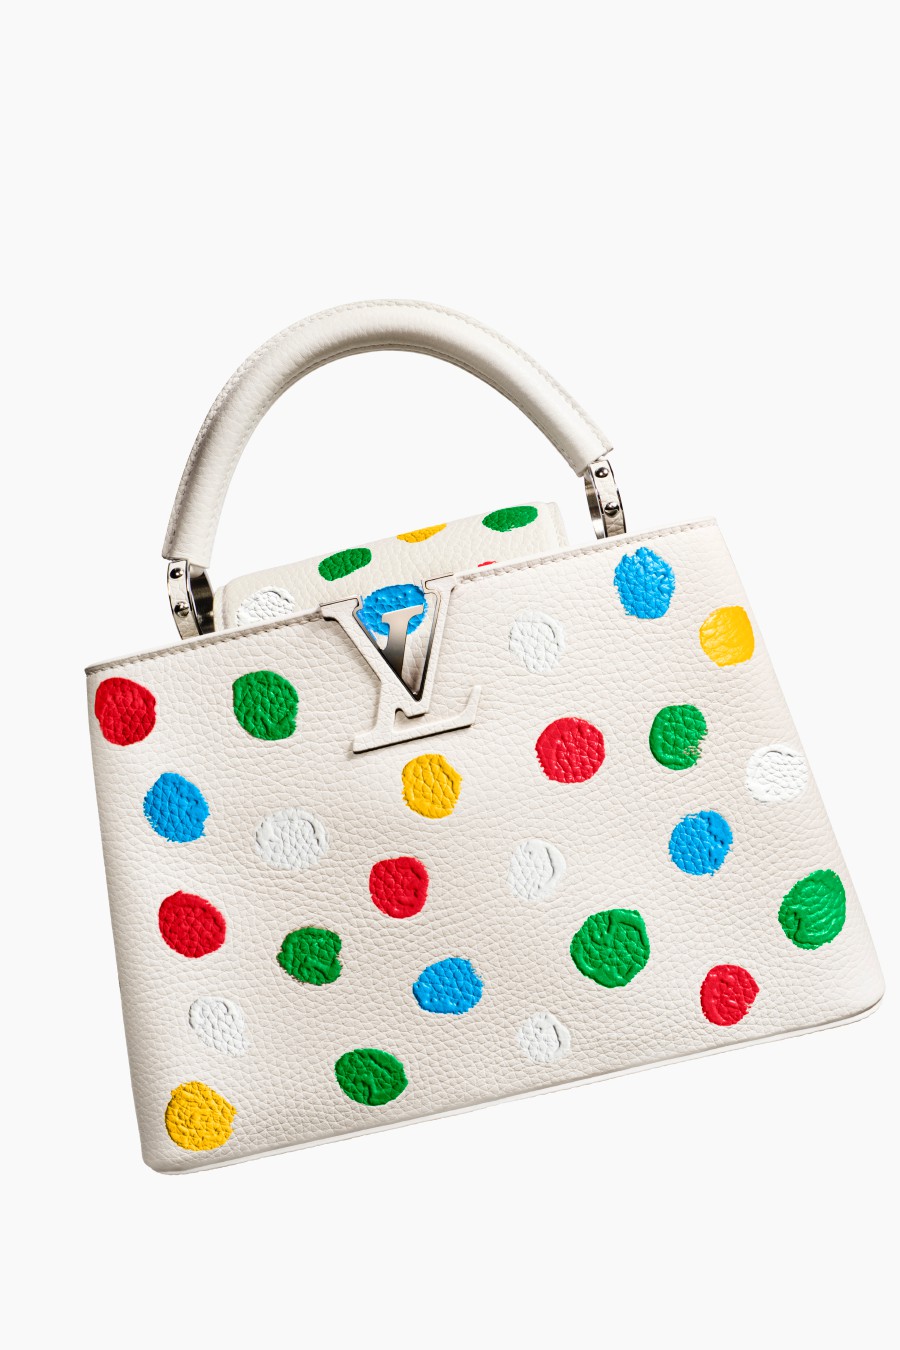 Going Dotty: Louis Vuitton – Yayoi Kusama Concept Store Opens in